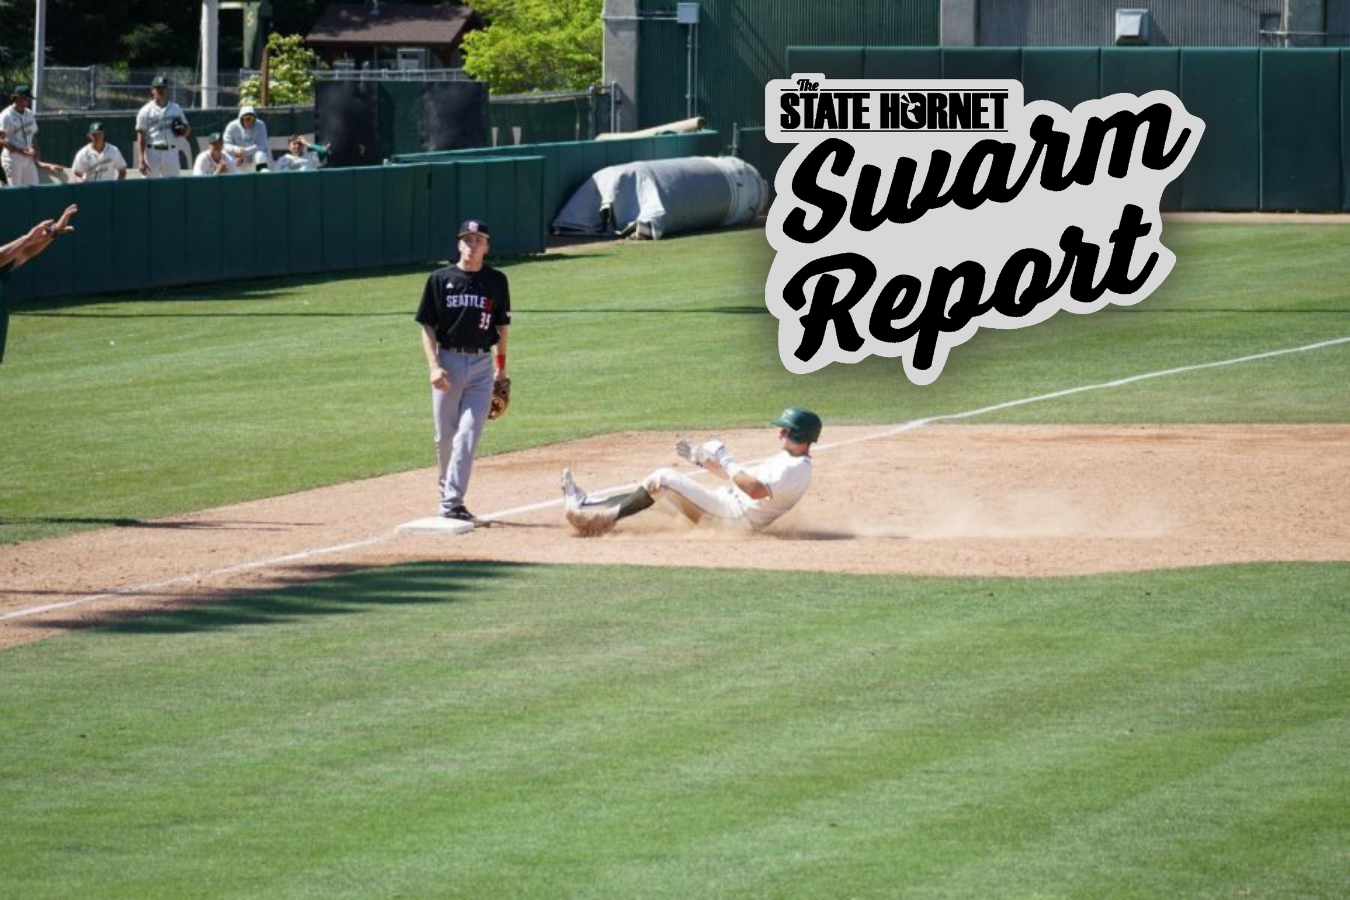 Dawson Bacho slides safely into base during a game against Seattle University. The Hornets played the Redhawks in a three-game series in Sacramento from Apr.15-17. (Photo by Dominique Williams. Graphic made in Canva by Mack Ervin III)